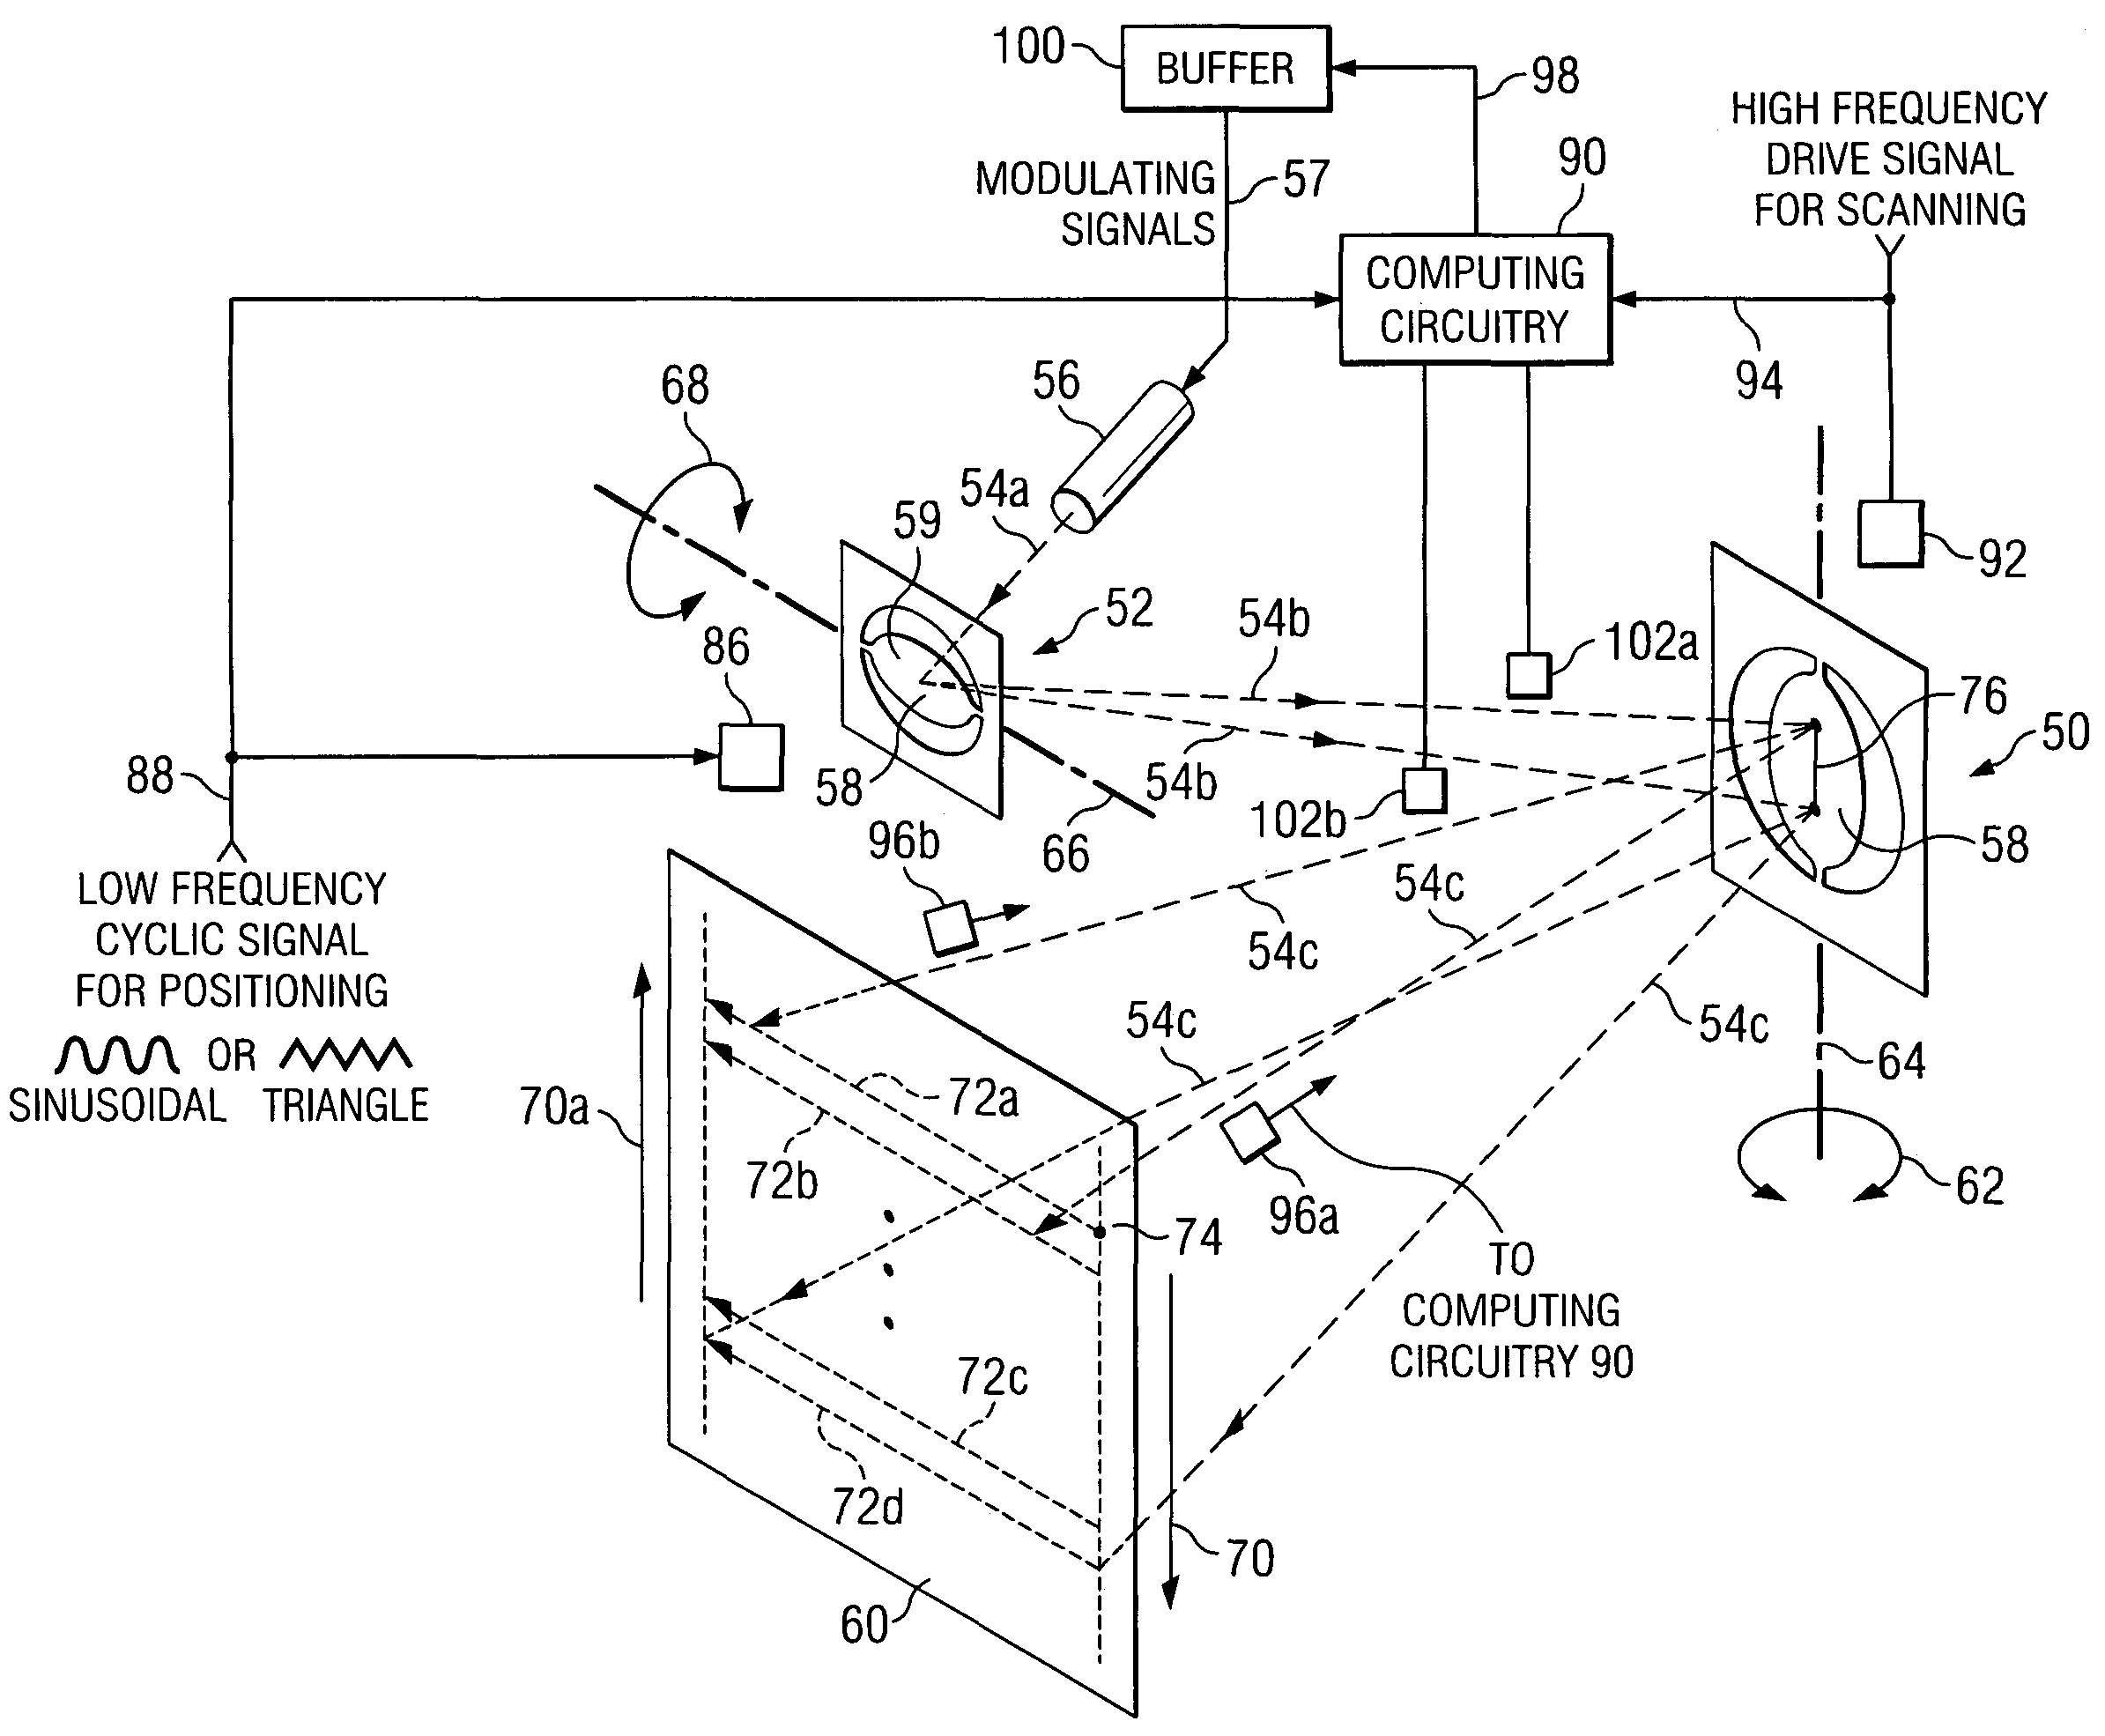 Method for maintaining the phase difference of a positioning mirror as a constant with respect to a high speed resonant mirror to generate high quality images